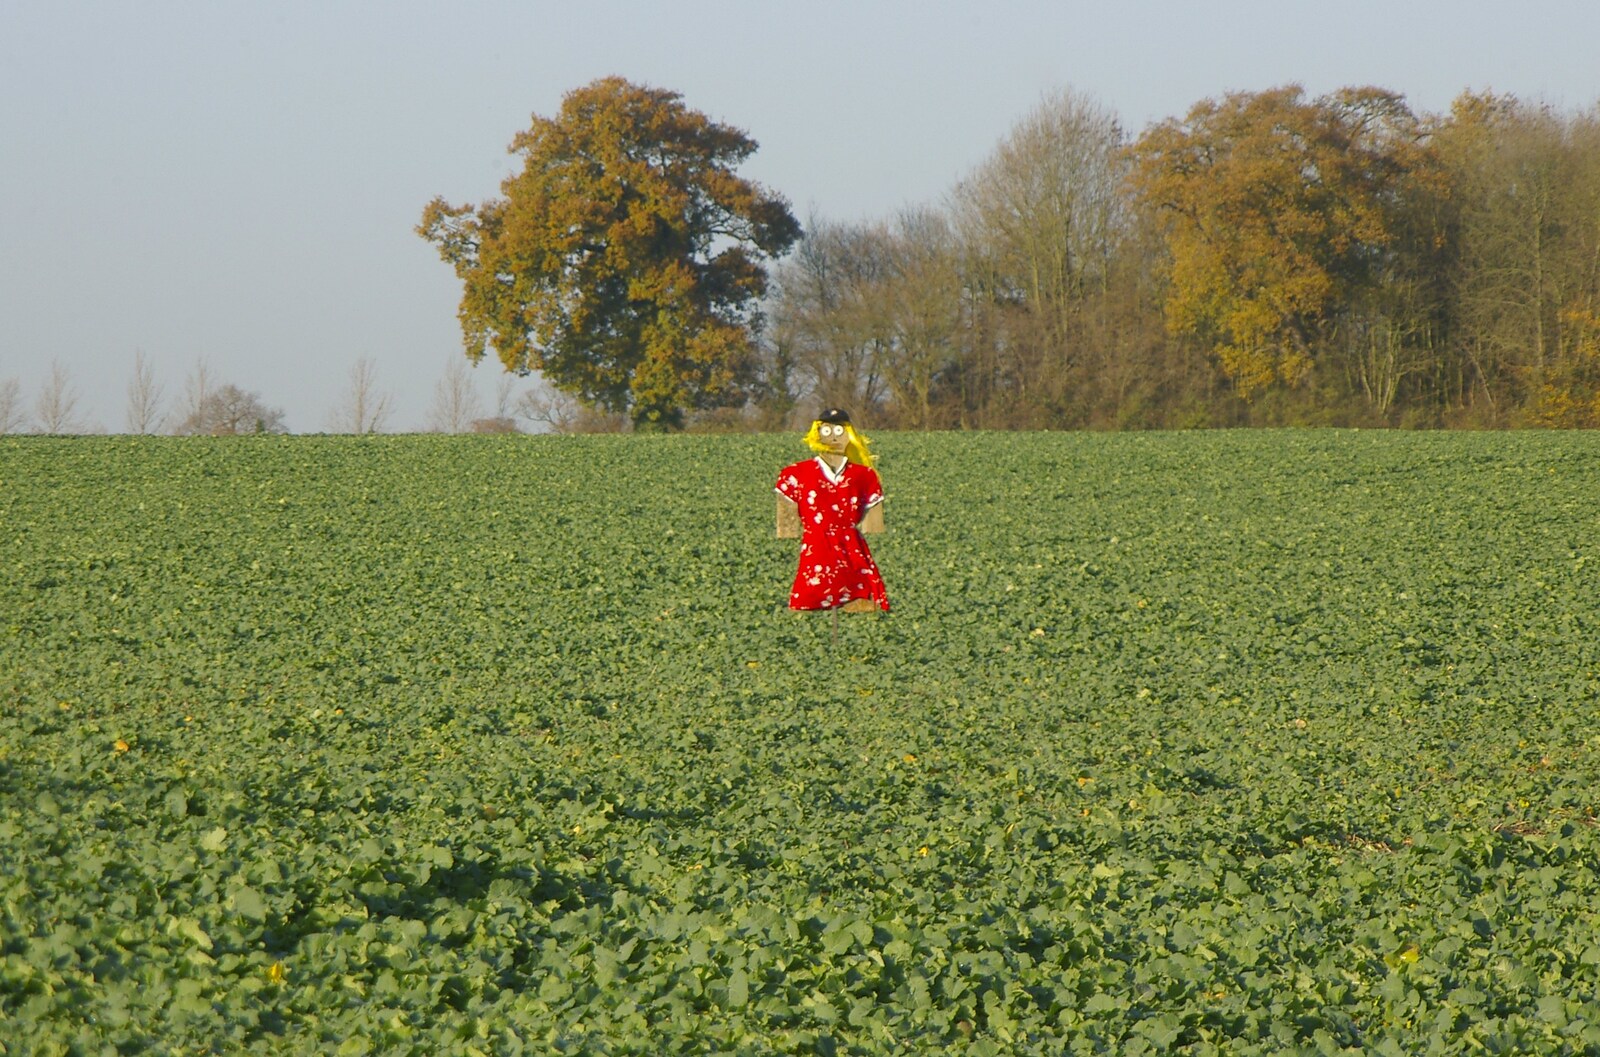 Scarecrow in a field from Qualcomm Christmas, The BBs and Isobel Moves Flats, Cambridge and Ascot, Berkshire - 2nd December 2006